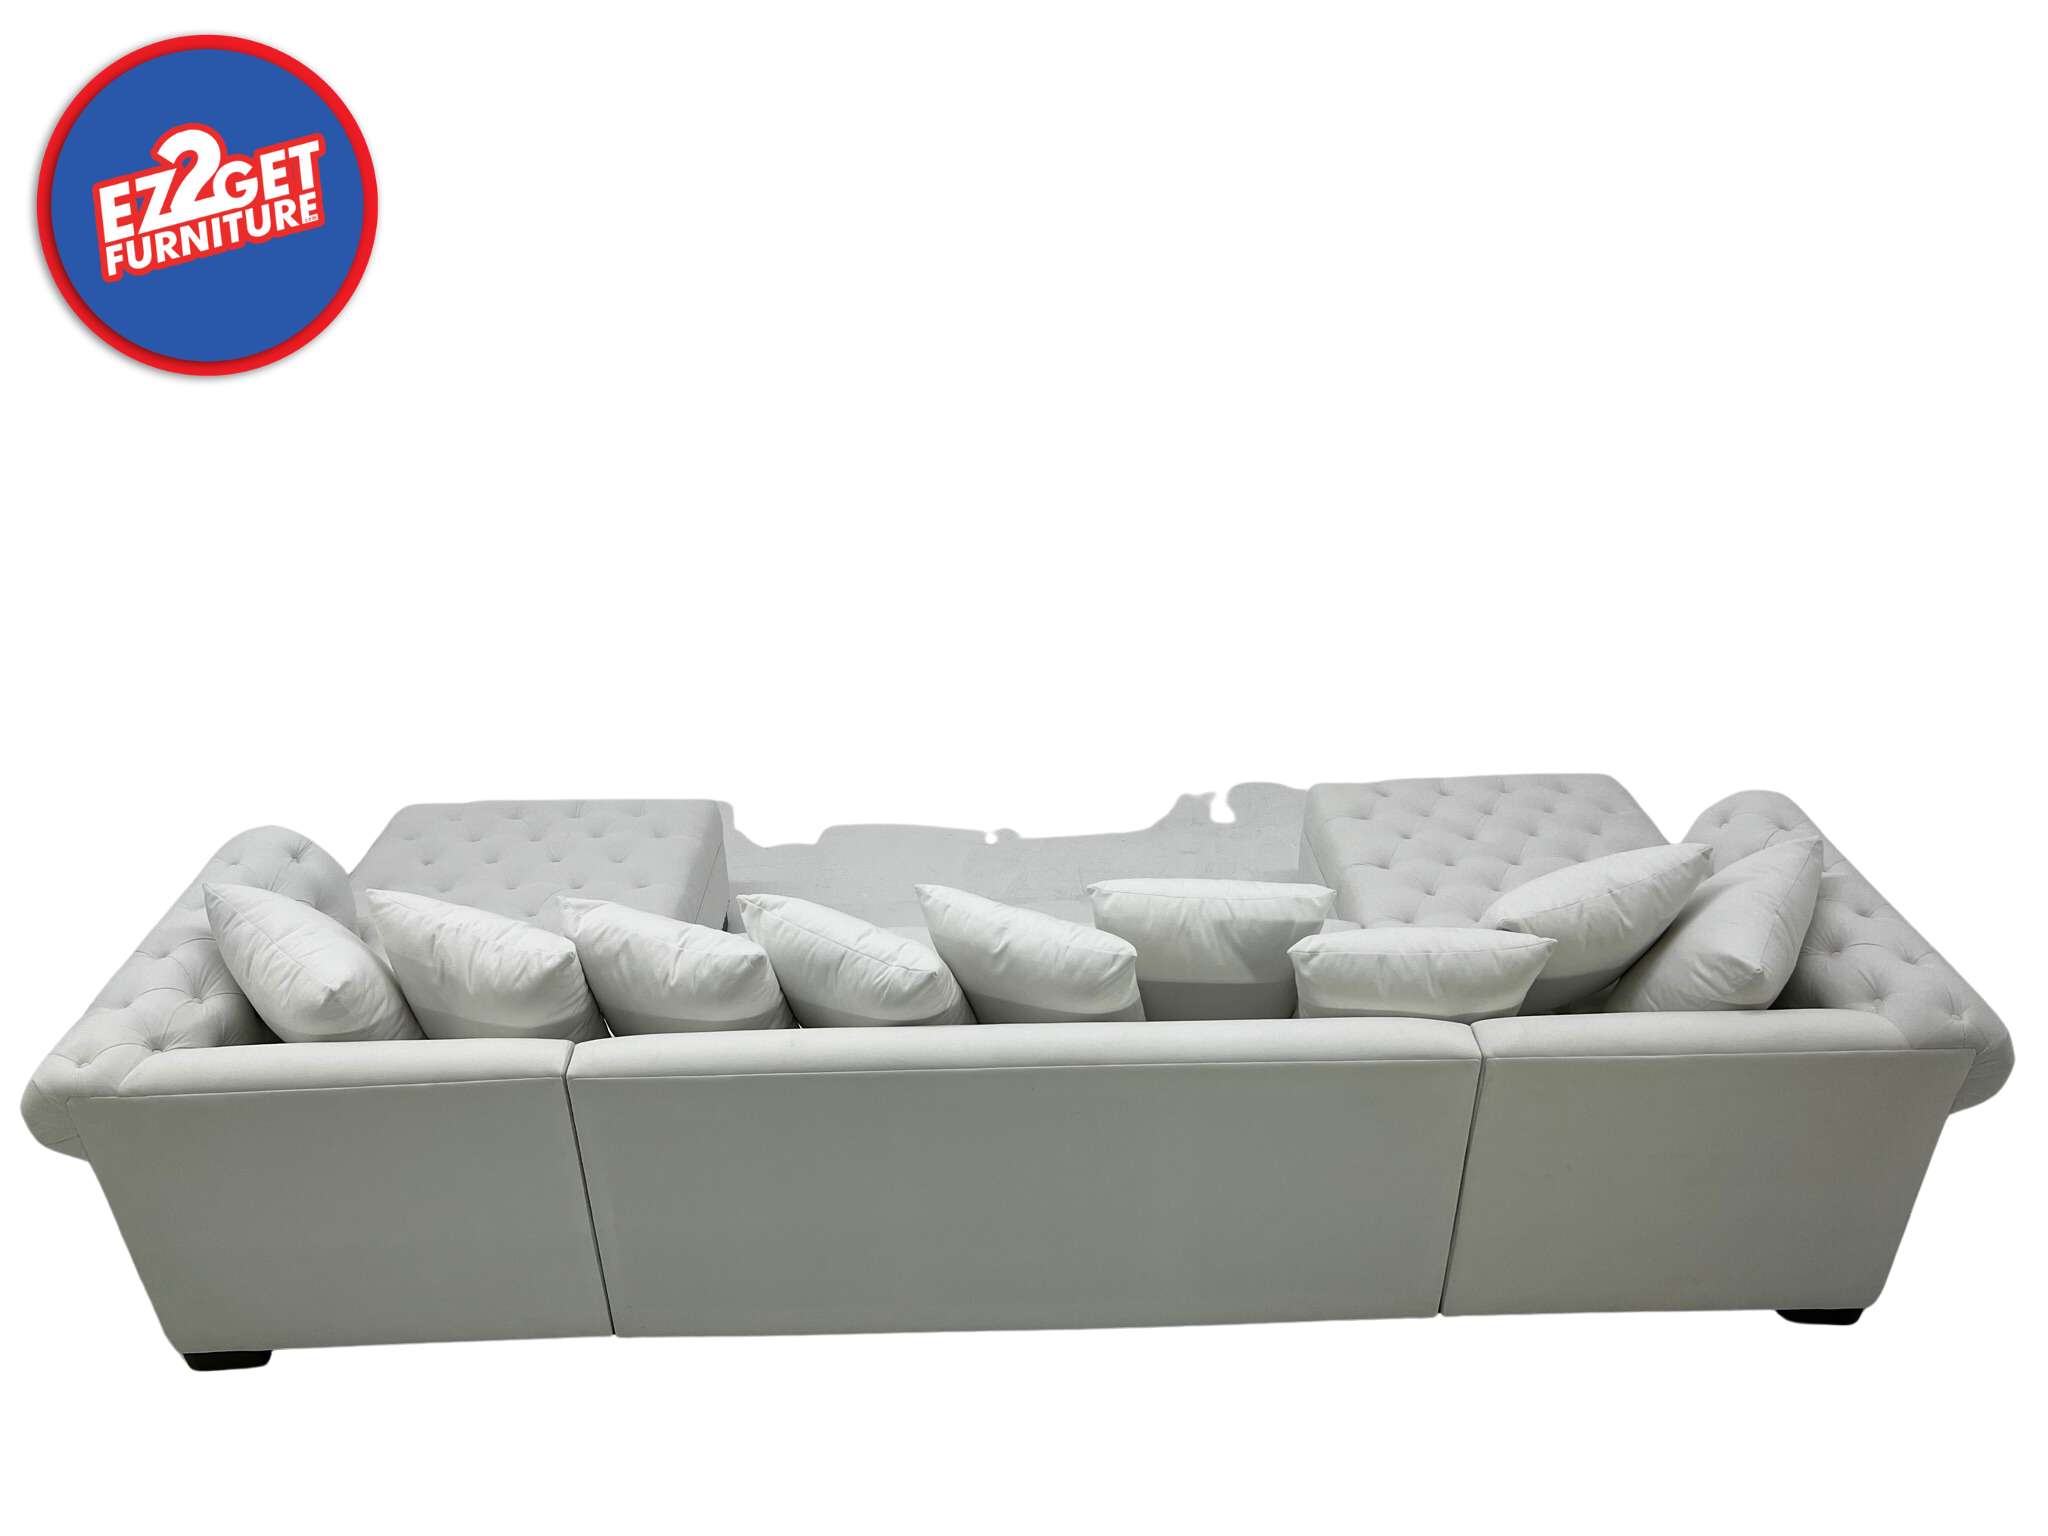 The Kayle White Sectional In suede with tufted seats